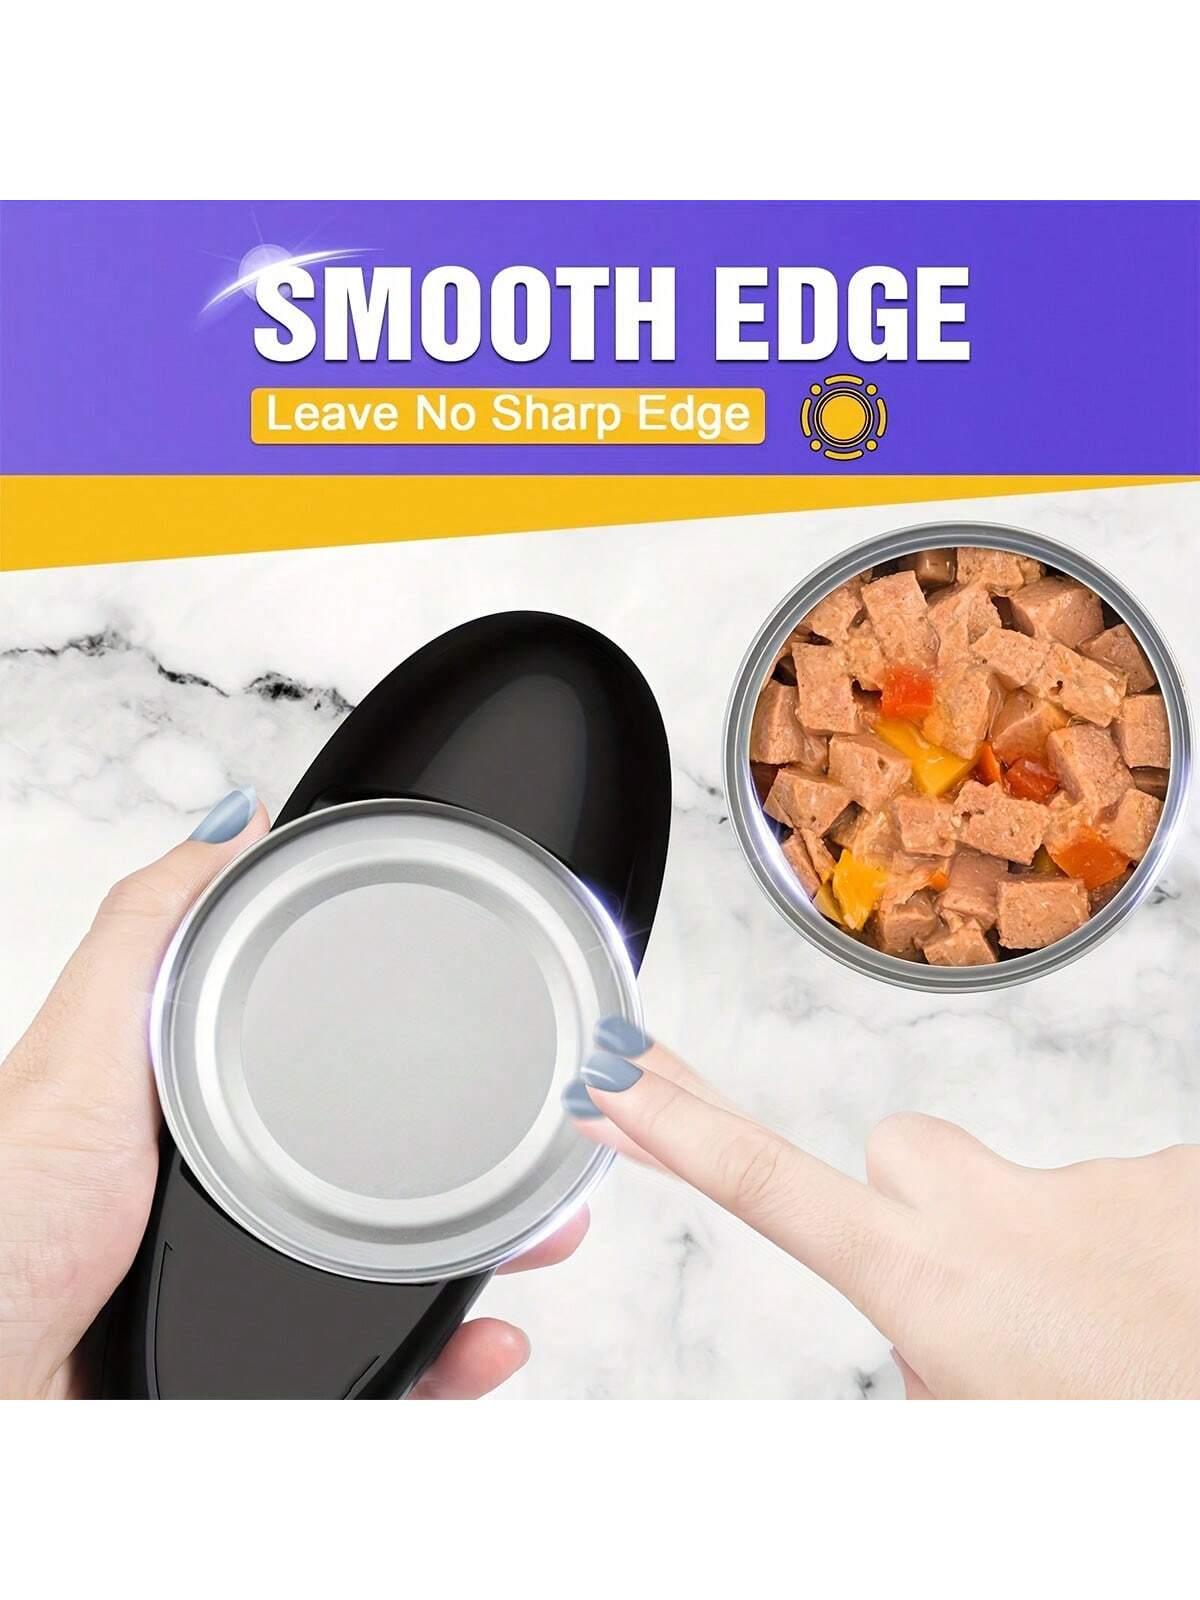 1pc Electric Can Opener, Automatic Safety Can Opener With One Contact,  Restaurant Battery Operated Handheld Can Openers